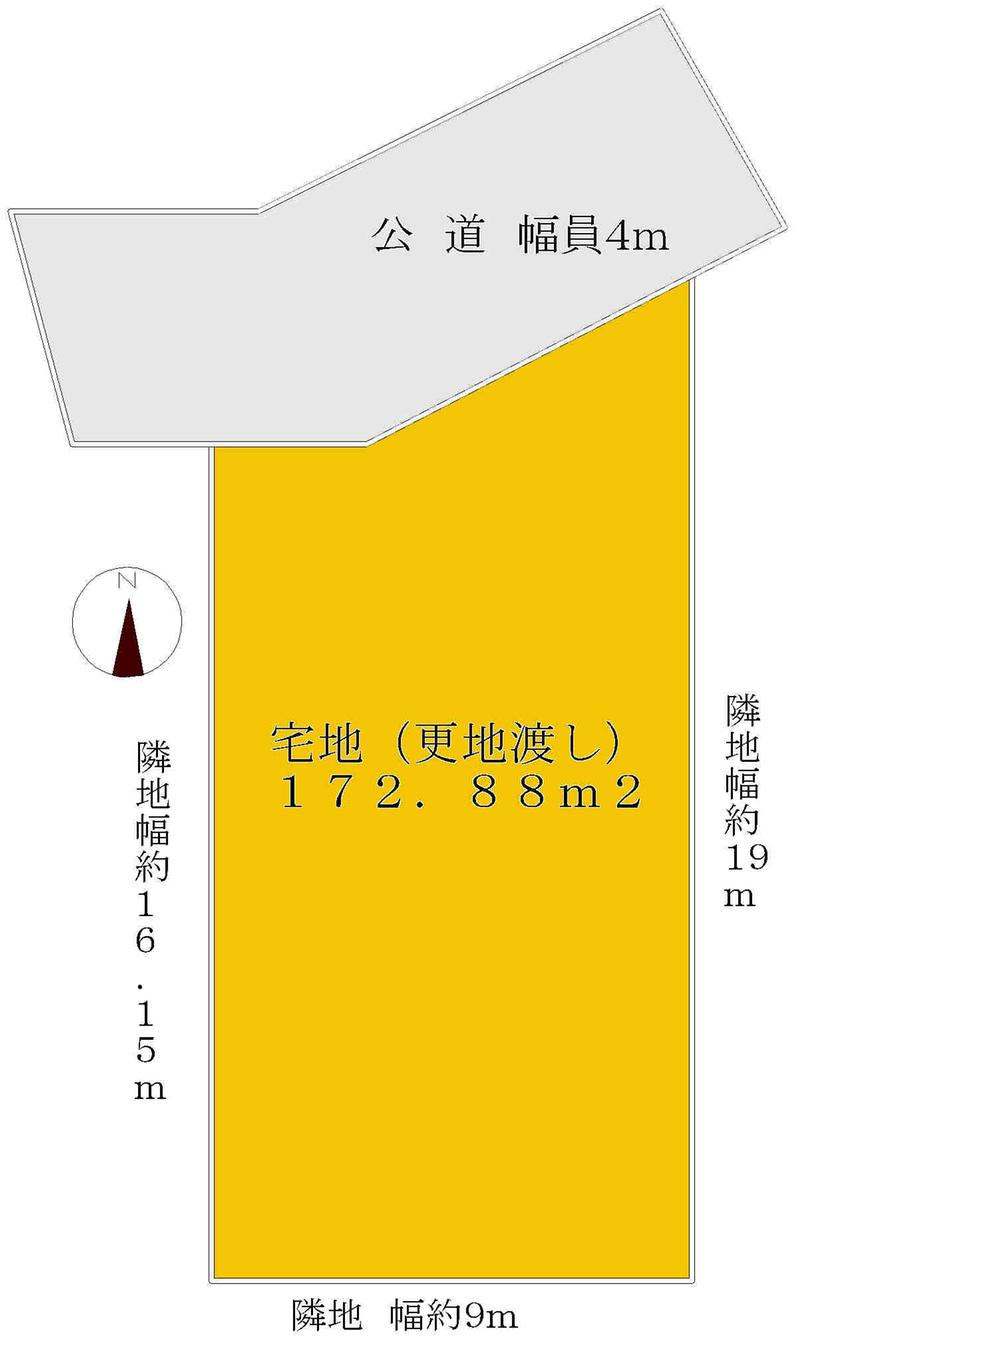 Compartment figure. Land price 13,850,000 yen, Is a land area 172.88 sq m vacant lot passes. 